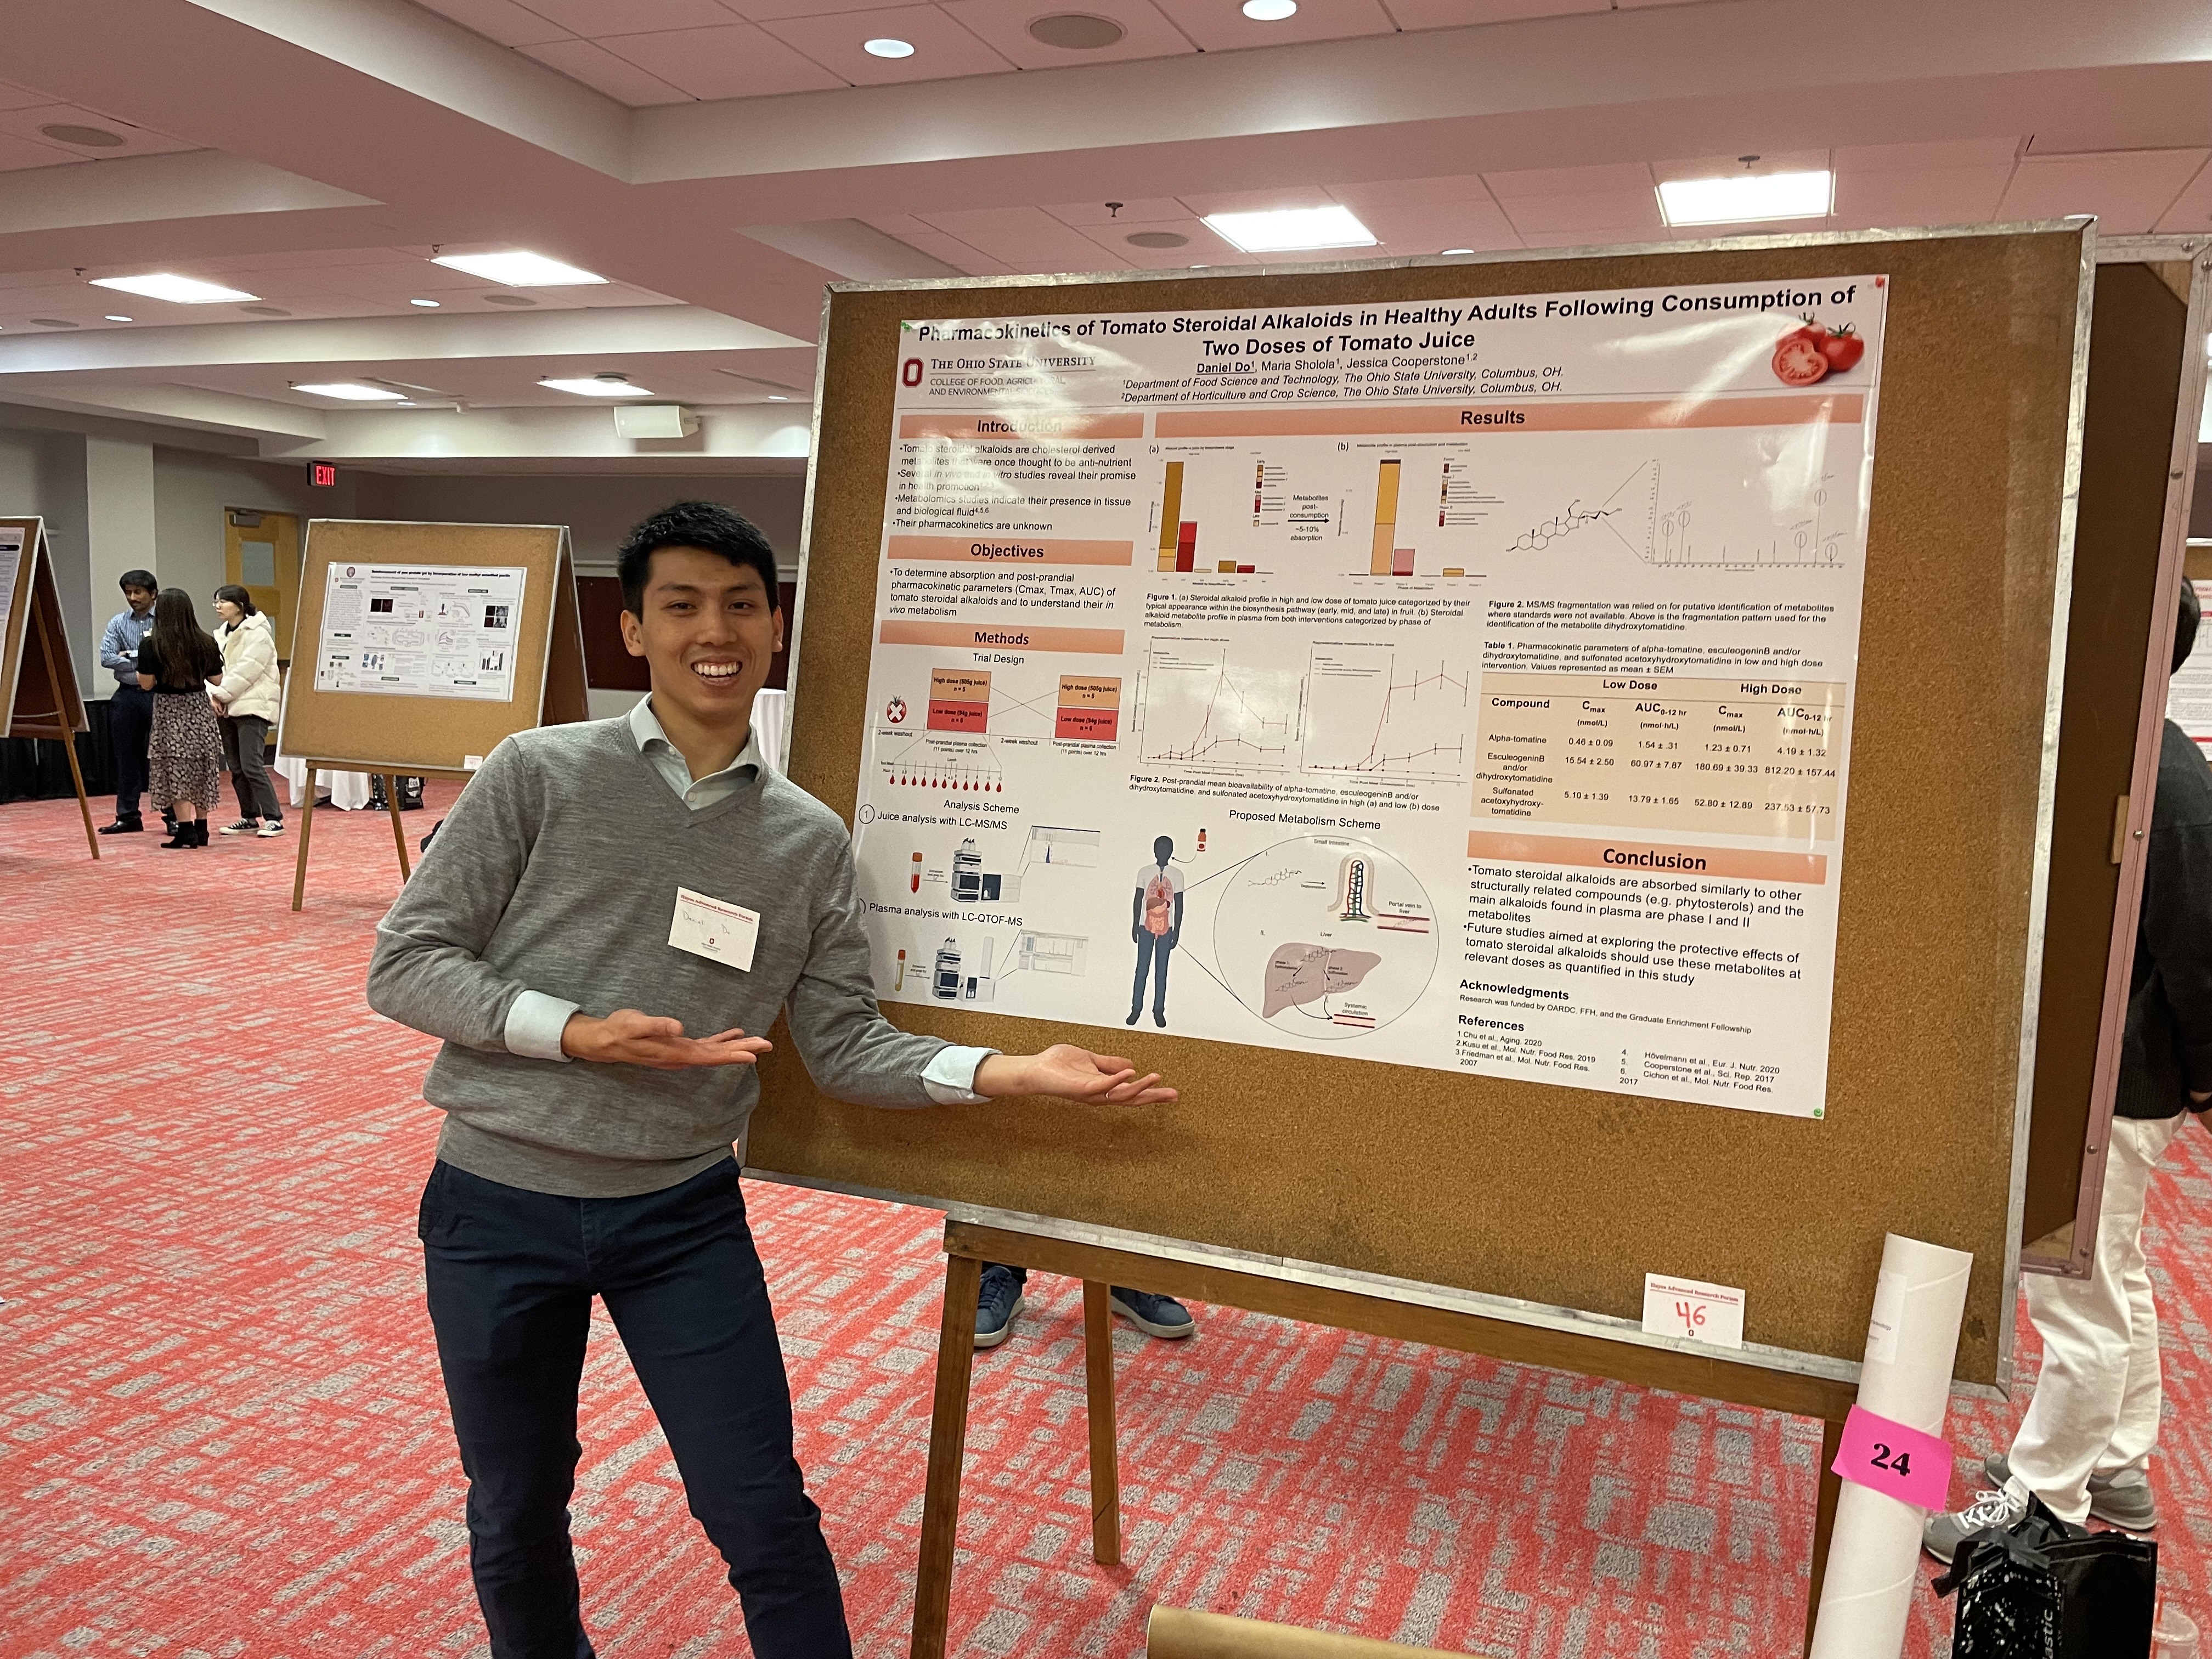 Daniel Do wins first place at the OSU Hayes Graduate Research Forum for his poster presentation on the pharmacokinetics of absorption of tomato alkaloids